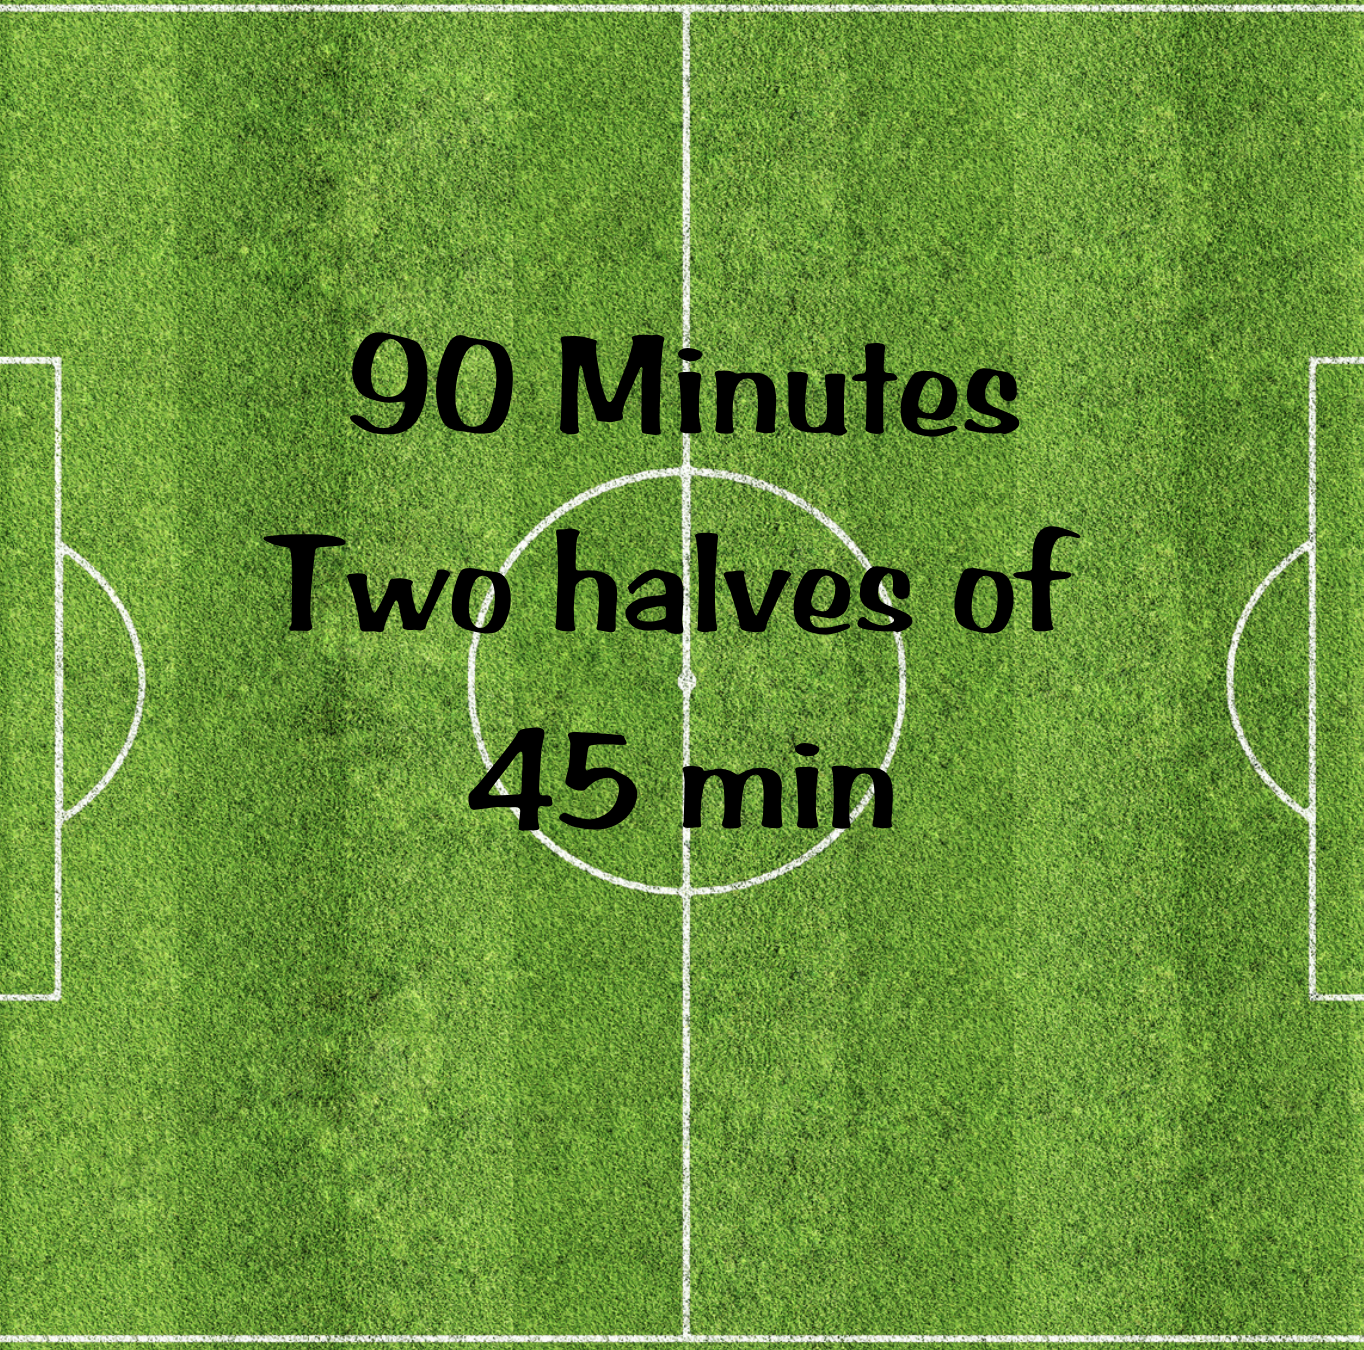 How long are soccer games